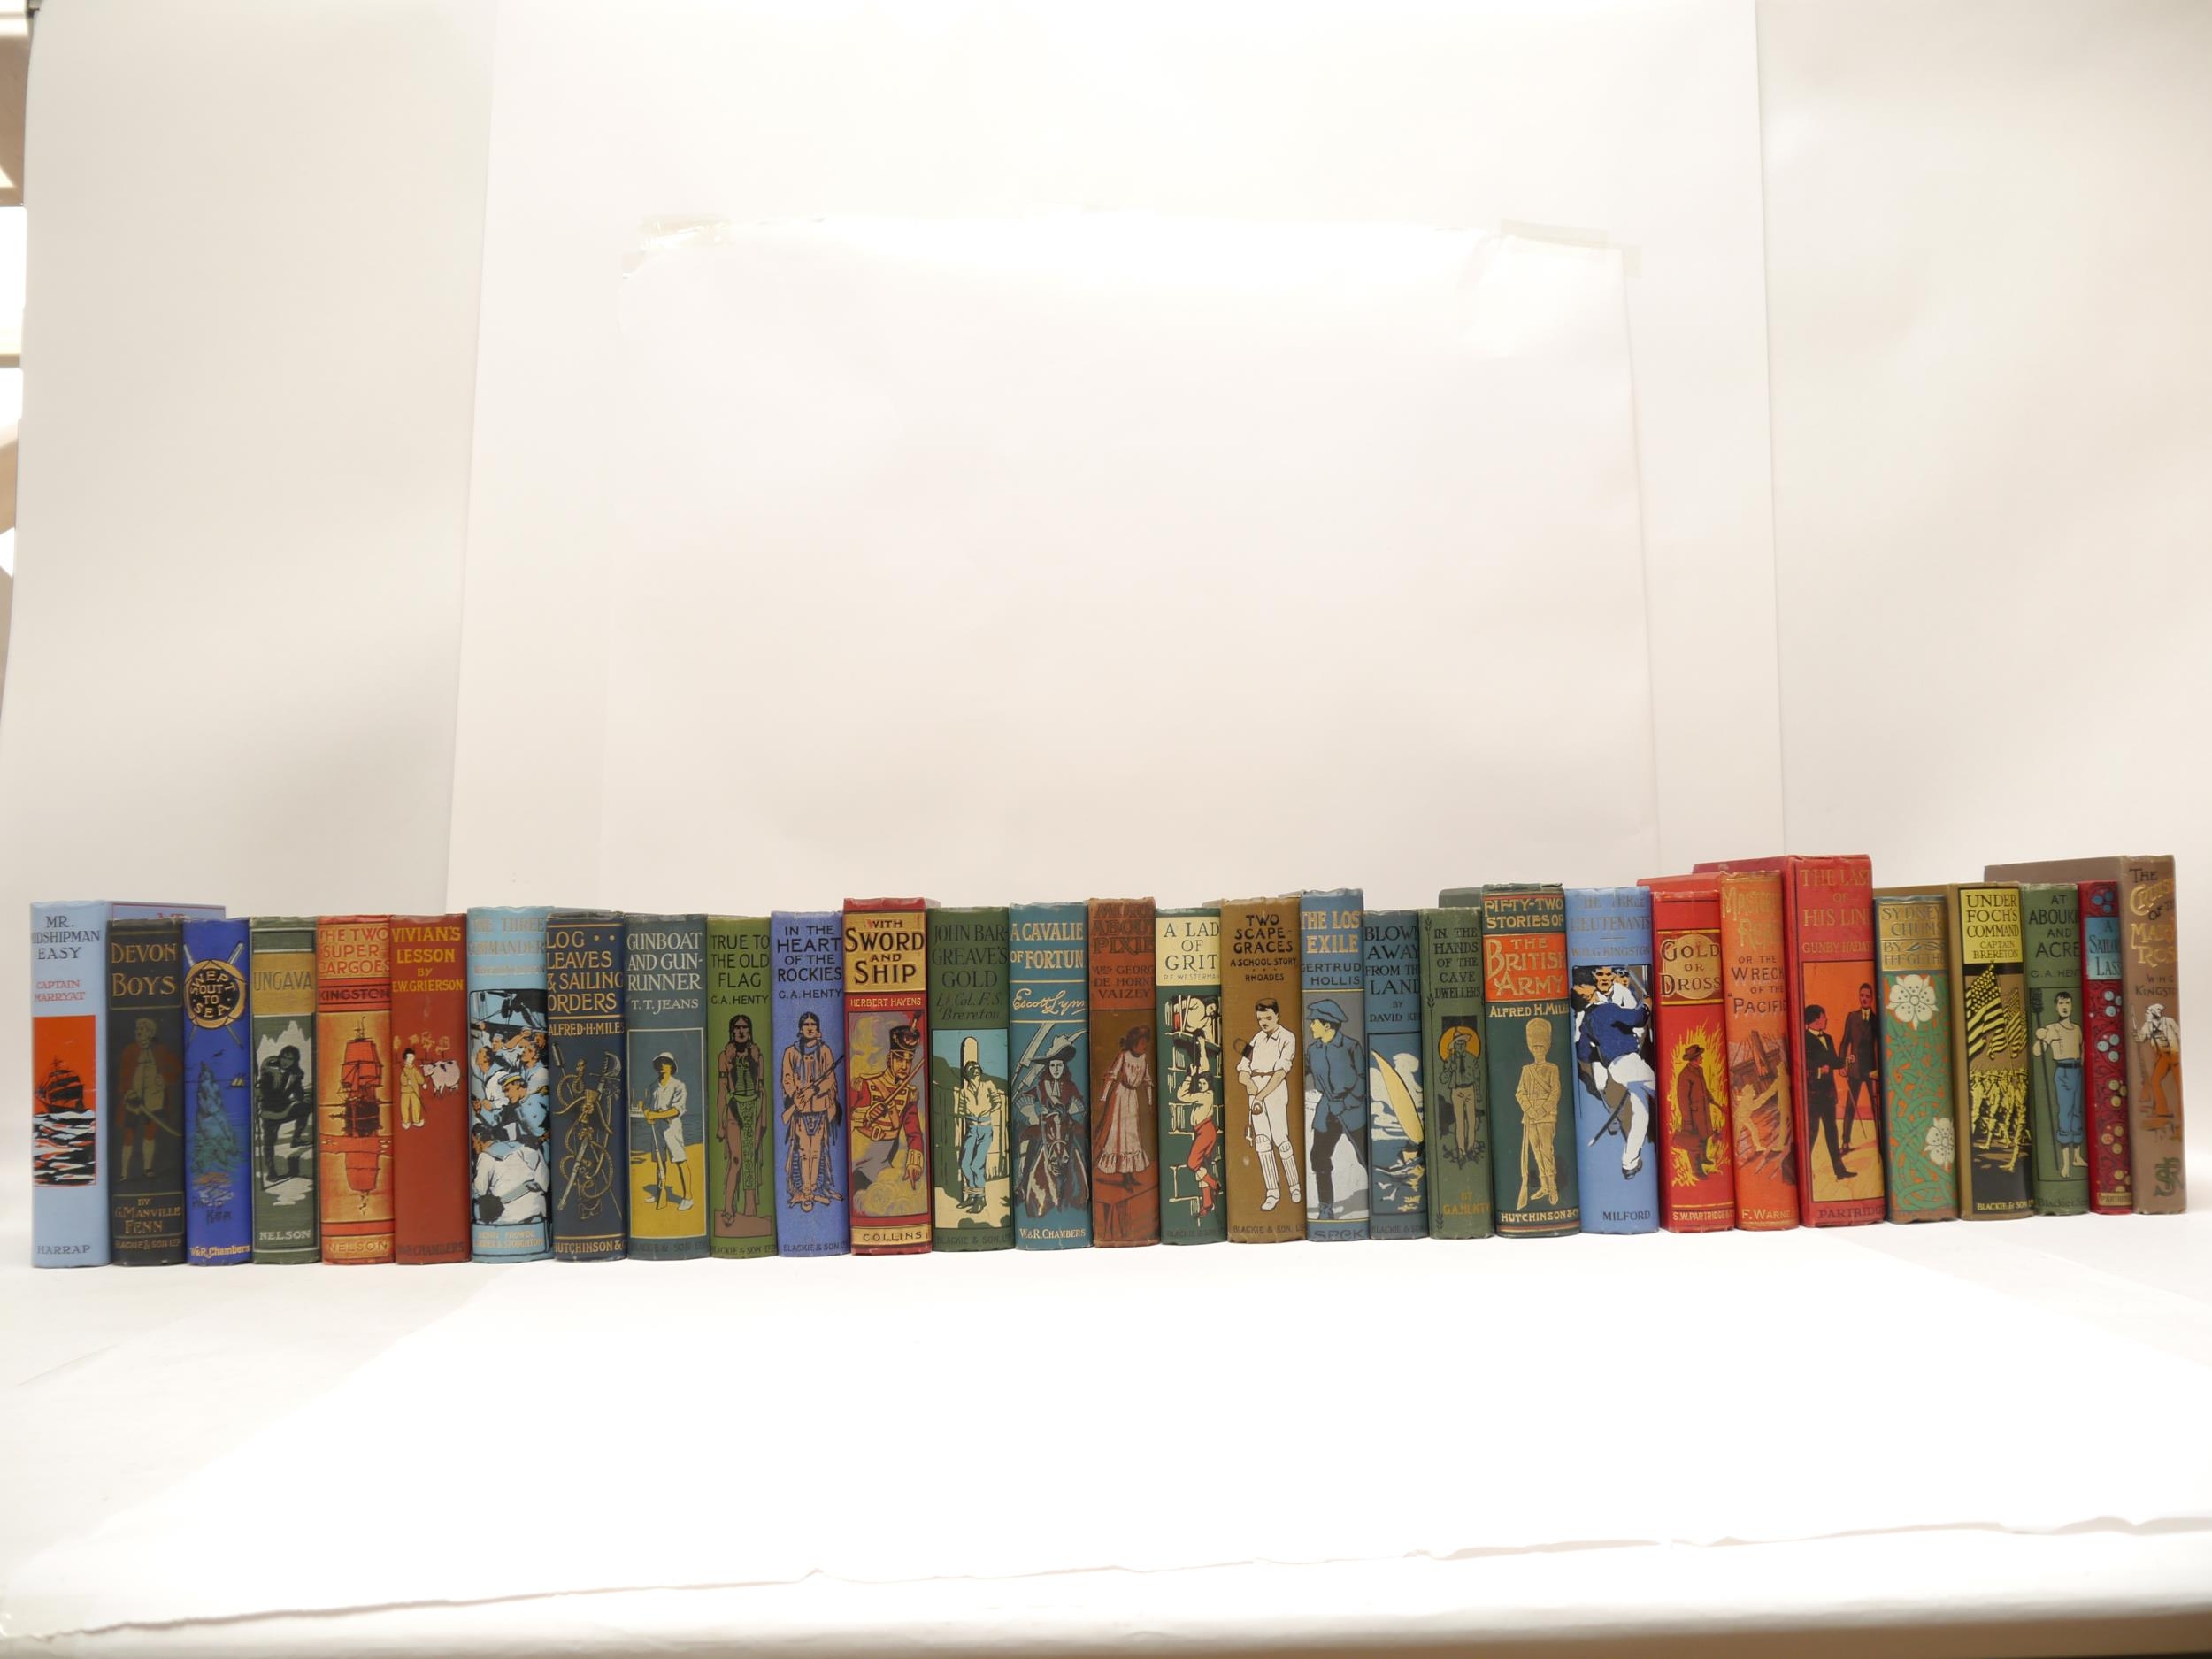 (Pictorial Cloth, Juvenile Fiction.) A collection of 29 titles boys adventure stories etc. including